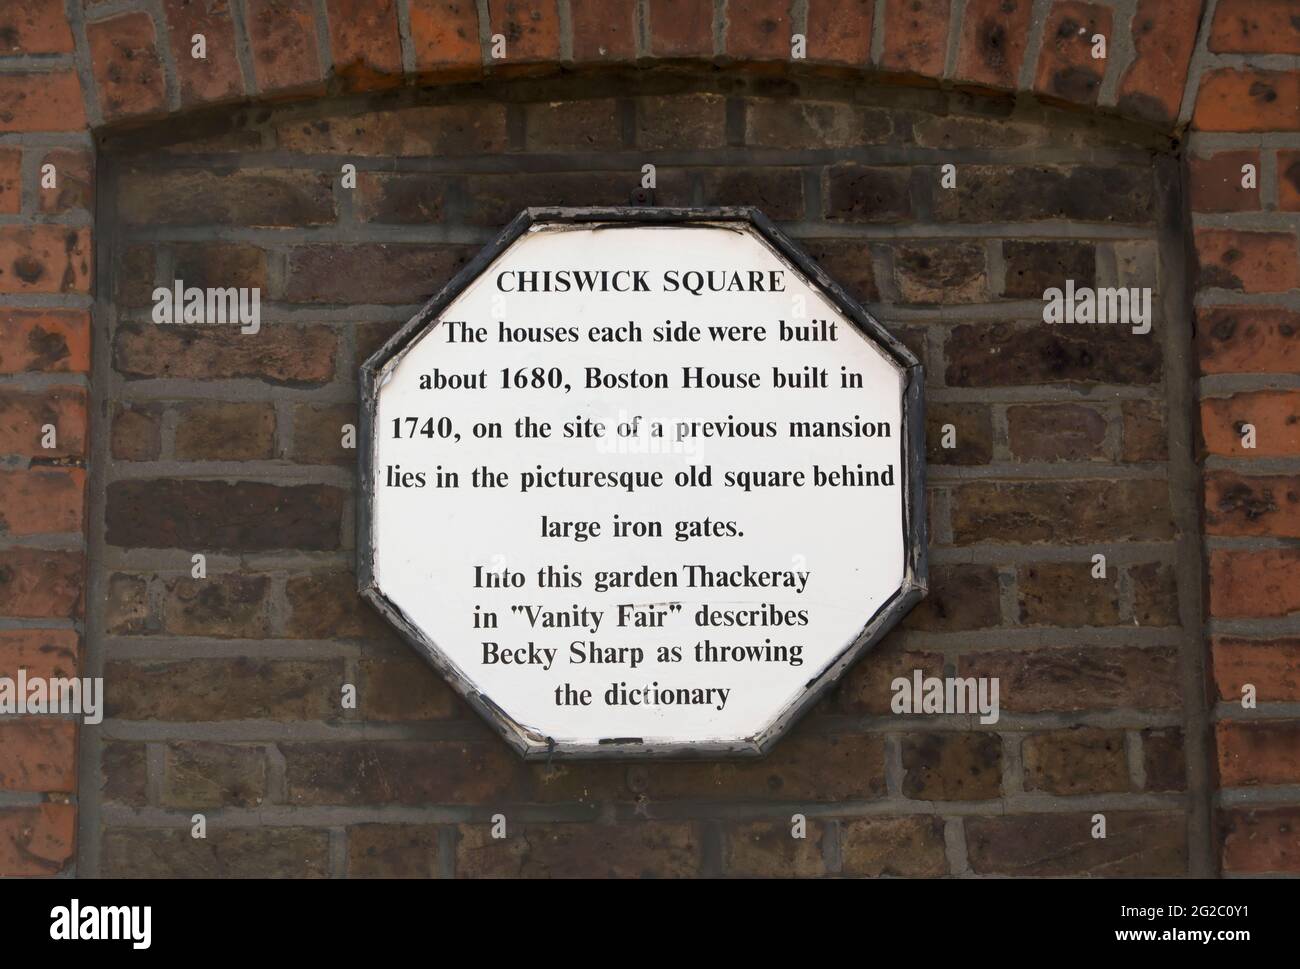 wall plaque at chiswick square, chiswick, london, england, describing the 17-century origins of the square and its link to thackeray's vanity fair Stock Photo